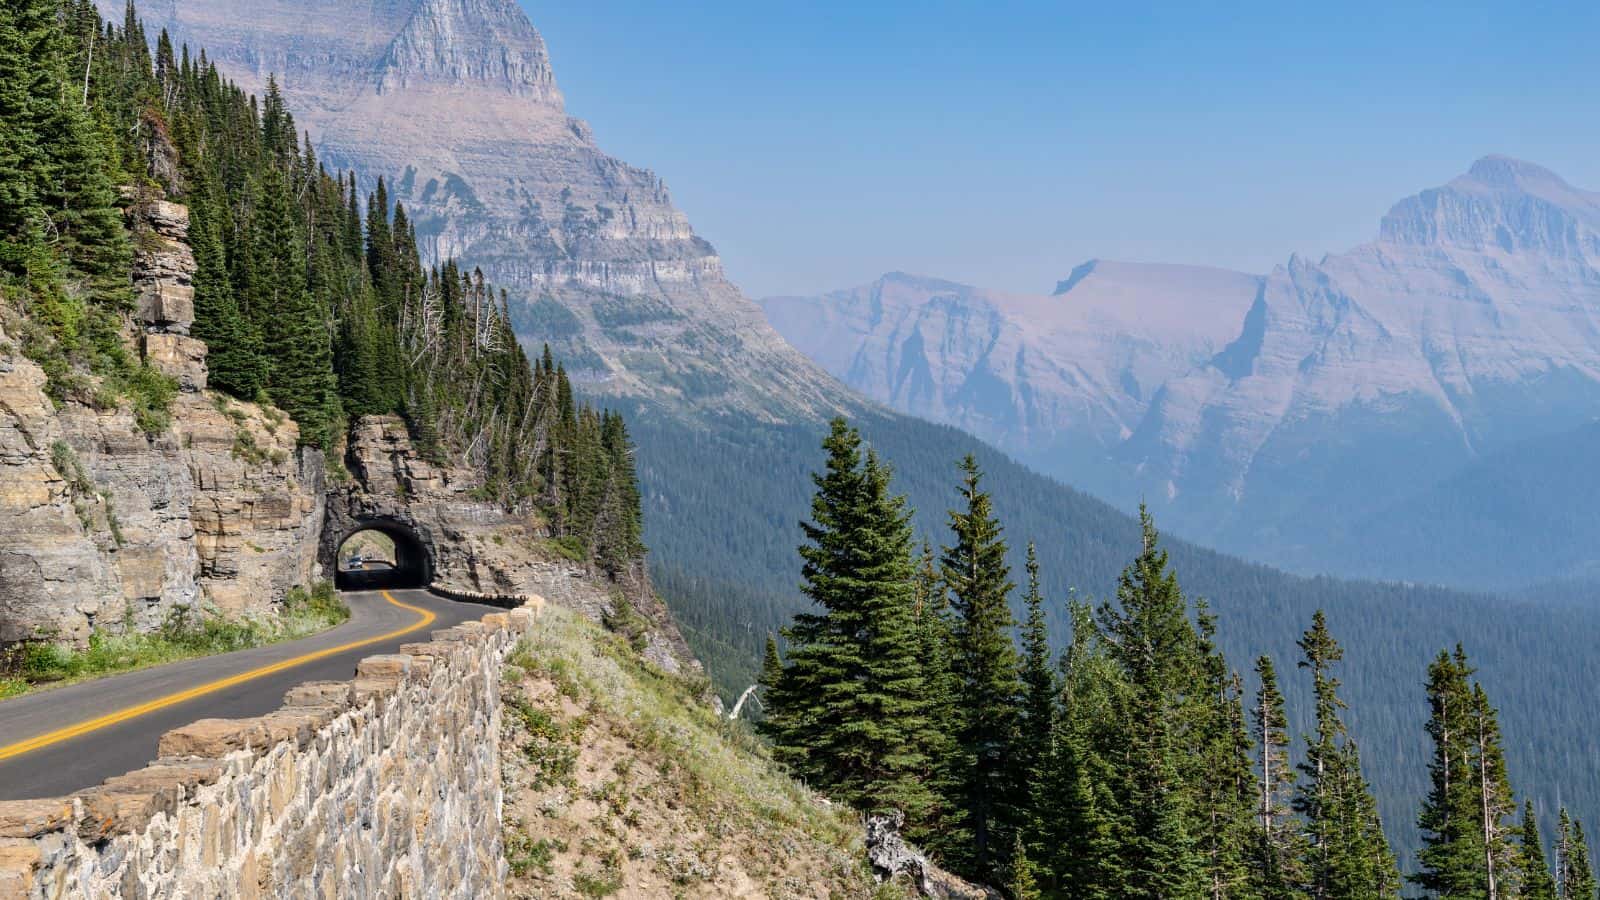 <p>Traverse the spectacular Going-to-the-Sun Road in <a href="https://www.nps.gov/glac/index.htm" rel="nofollow external noopener noreferrer">Glacier National Park</a>, offering awe-inspiring vistas of snow-capped mountains, alpine meadows, and pristine lakes.</p><p>This 50-mile route crosses the Continental Divide, providing breathtaking views from Logan Pass and the Weeping Wall.</p><p>Explore hiking trails, spot wildlife such as grizzly bears and mountain goats, and enjoy the serenity of one of America’s most beautiful national parks. The road is typically open from late June to mid-October, making it a perfect summer and early fall destination.</p>